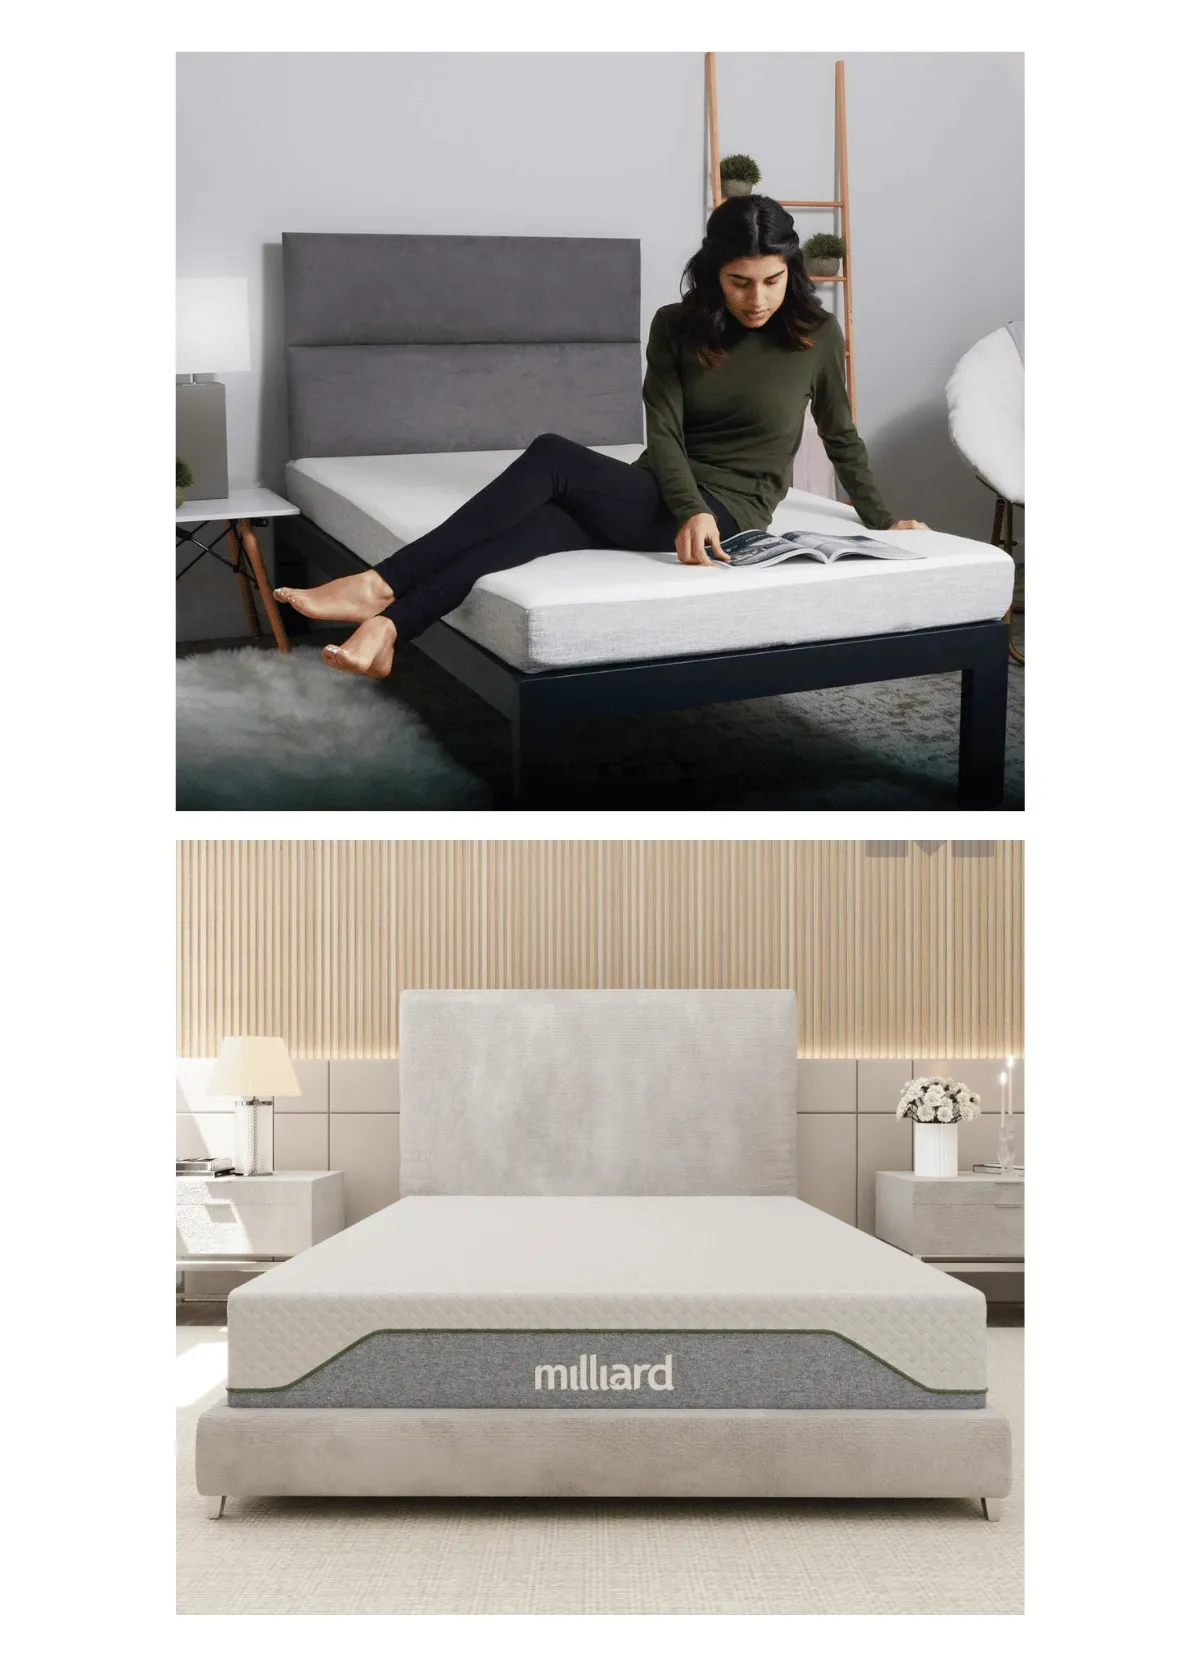 "How Does Milliard Mattress Combine Affordability with Luxury?"